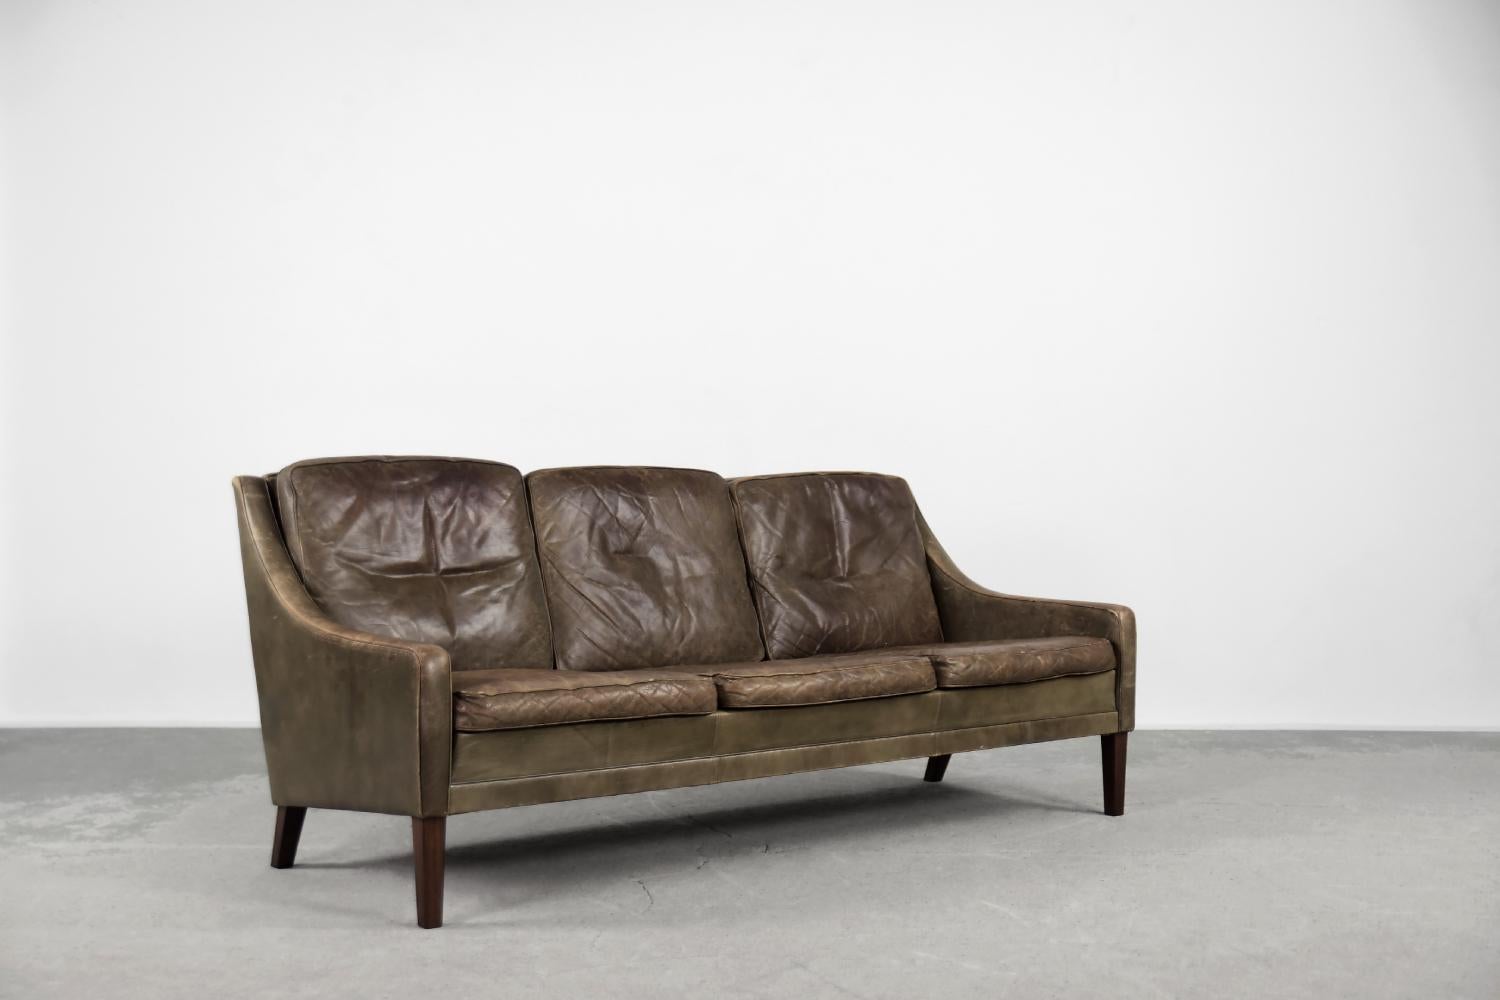 This three-seater Mid-Century Modern vintage sofa was made in Denmark during the 1950s. The sofa is upholstered in natural leather in a brown and earthy color. The leather has original beautiful patina. It has three loosely placed seat and back